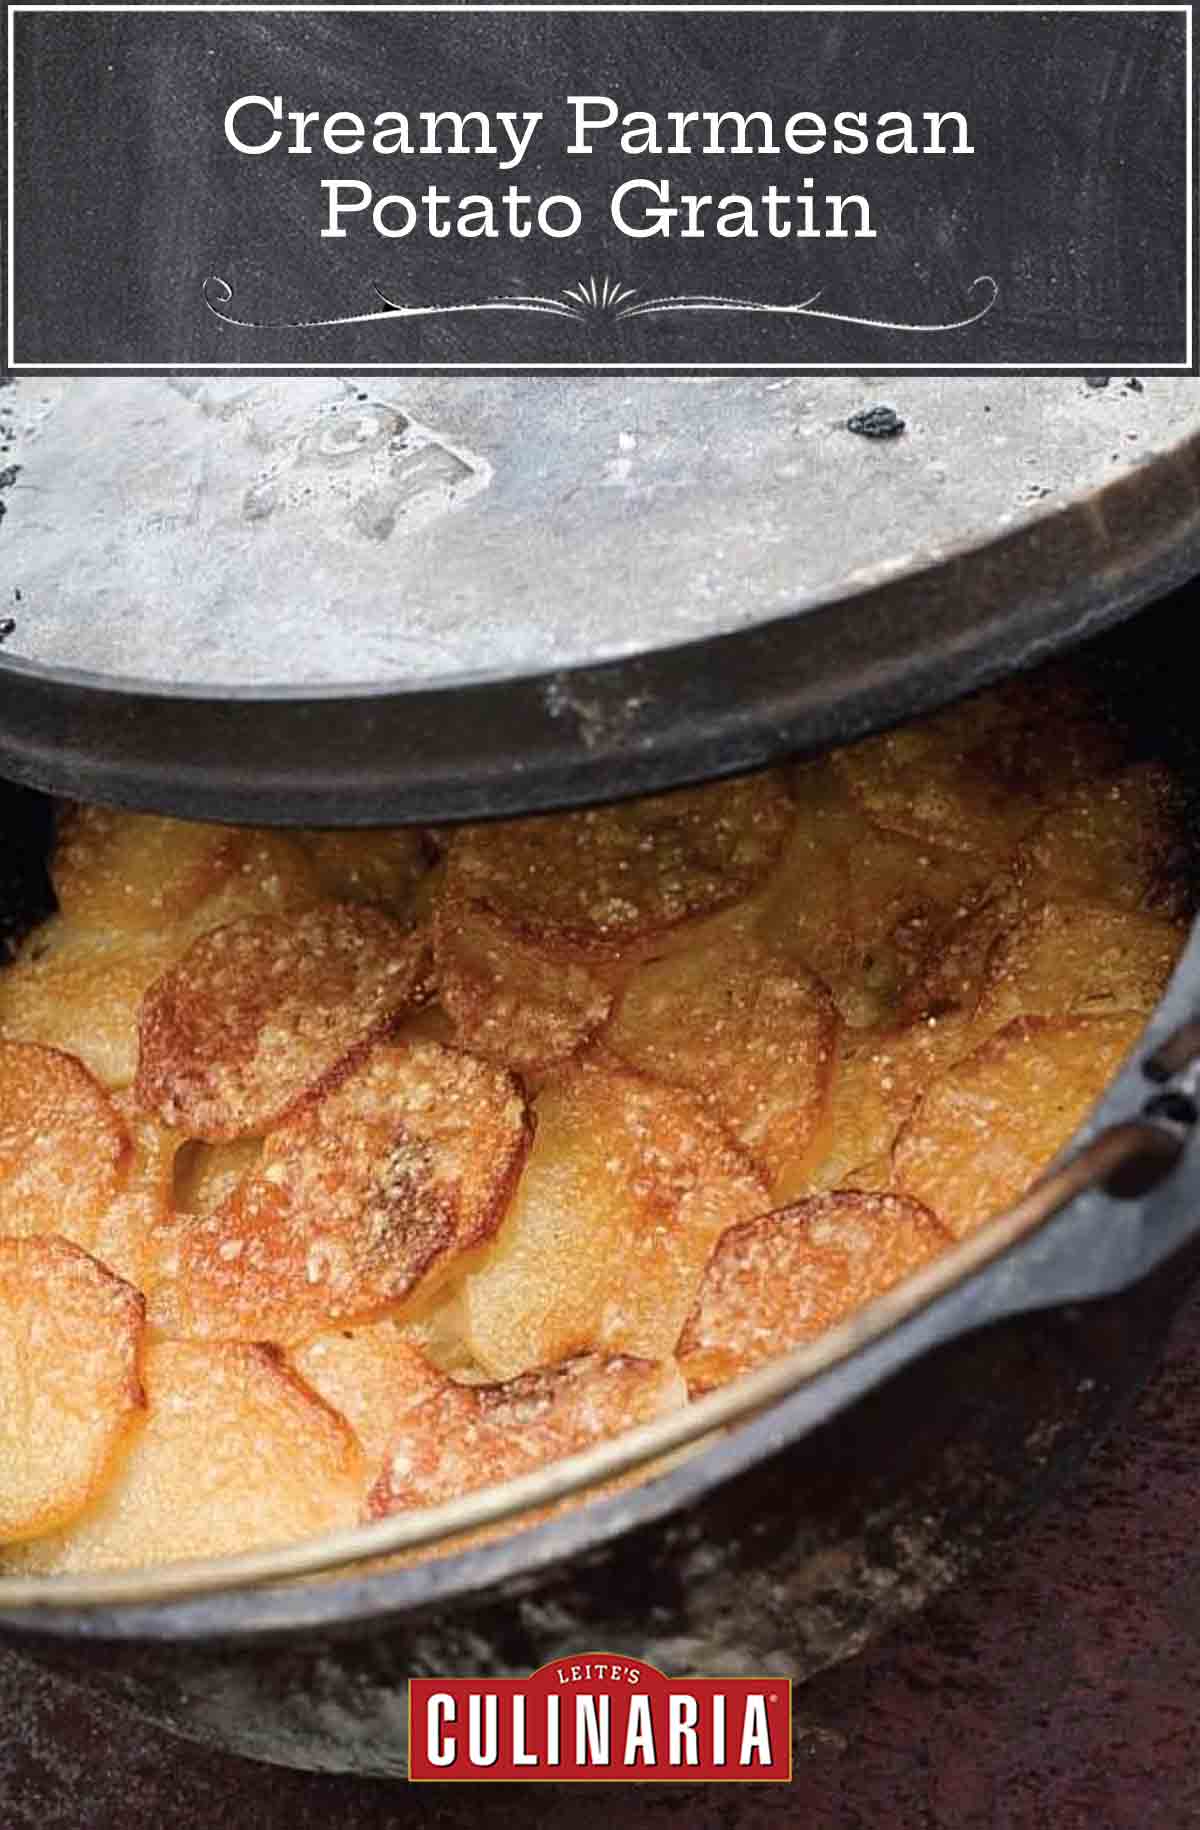 A partially covered Dutch oven filled with cooked Parmesan potato gratin.